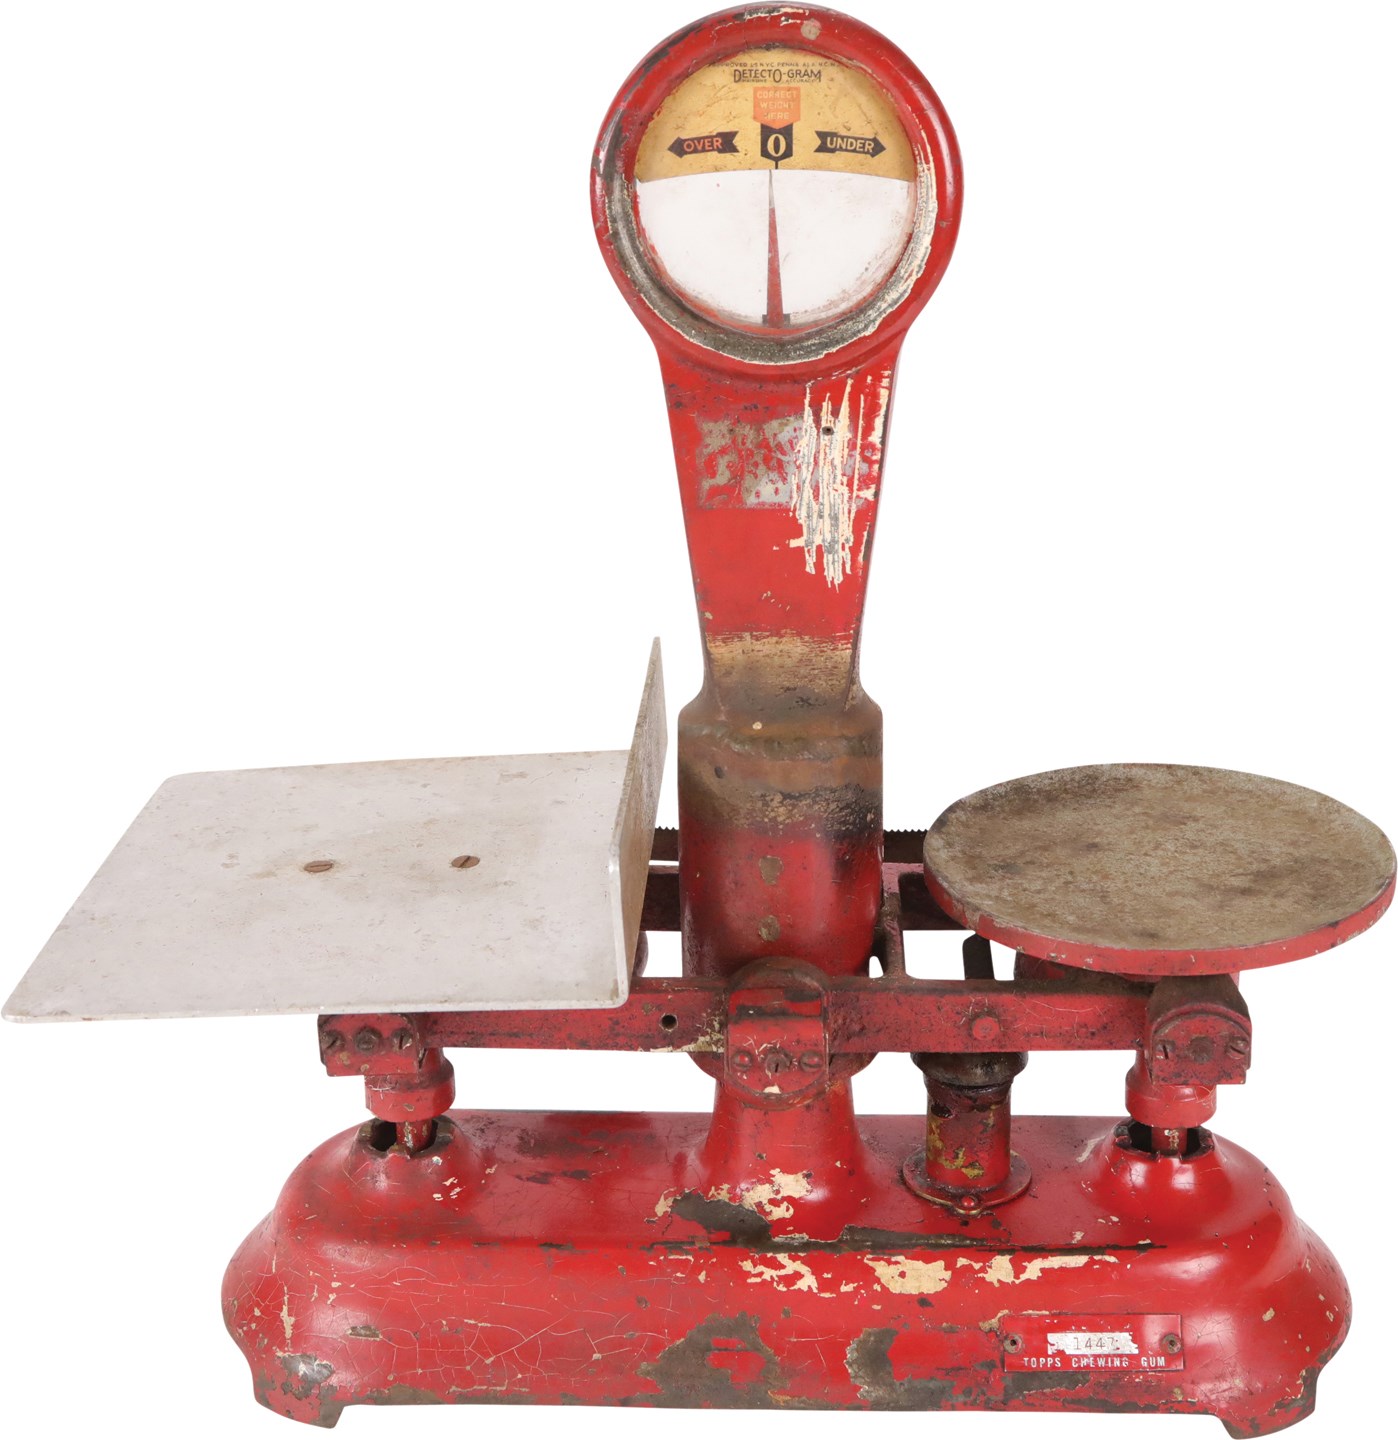 Baseball Memorabilia - Early 1950 Topps Scale Used to Weigh Boxes of Cards